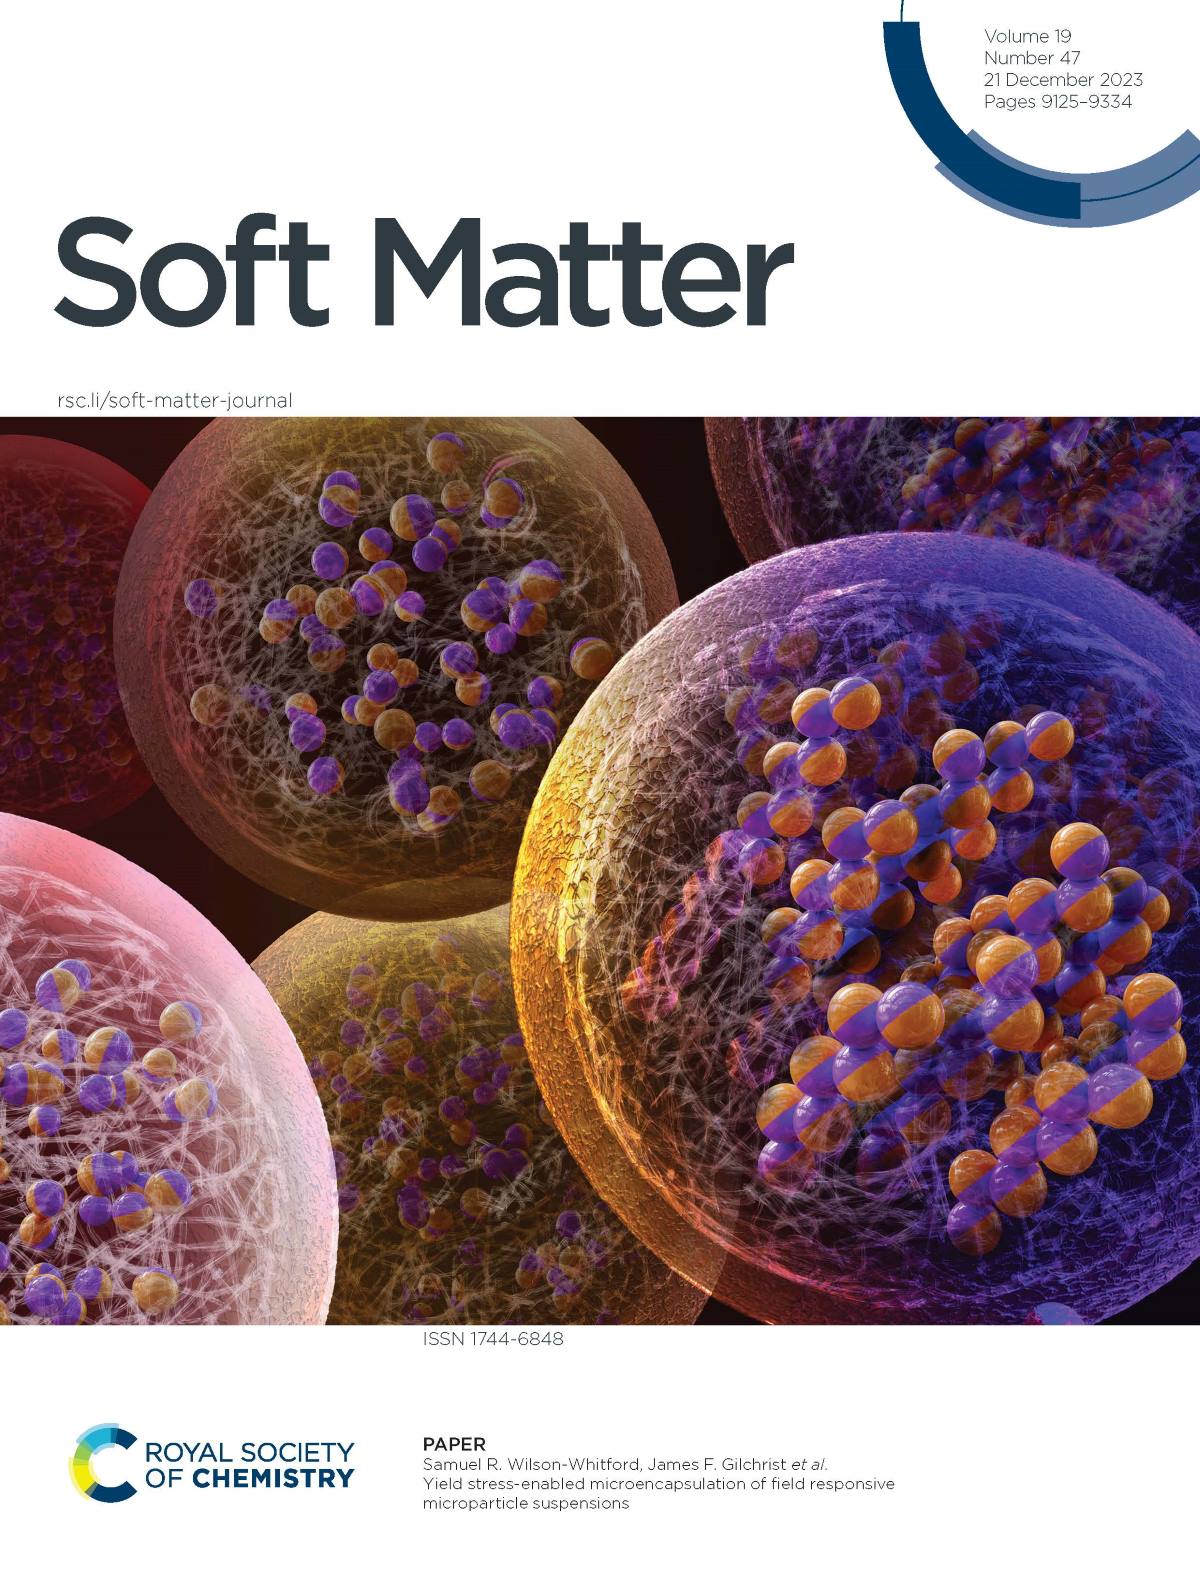 Soft Matter cover 21 Dec 2023 Issue 47